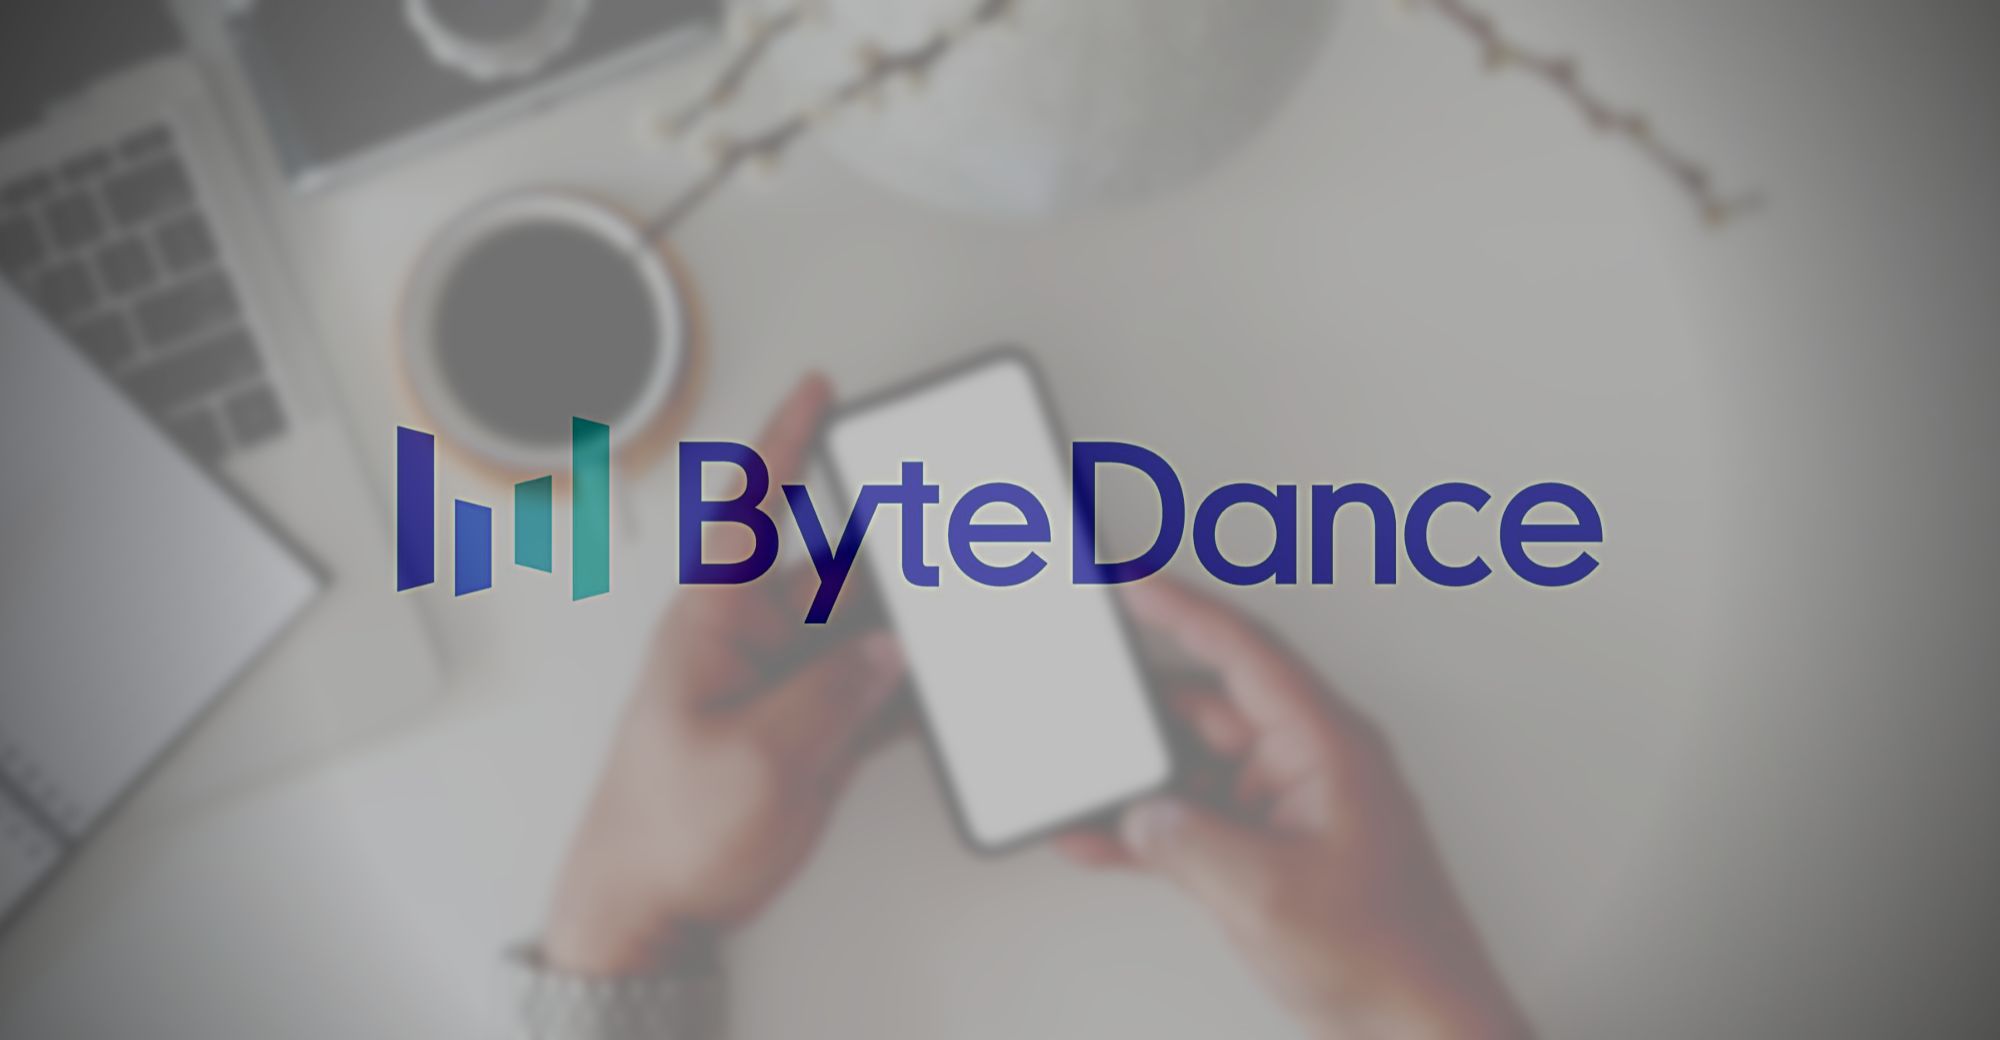 ByteDance Starts New Payroll Policy to Incentivize Staff